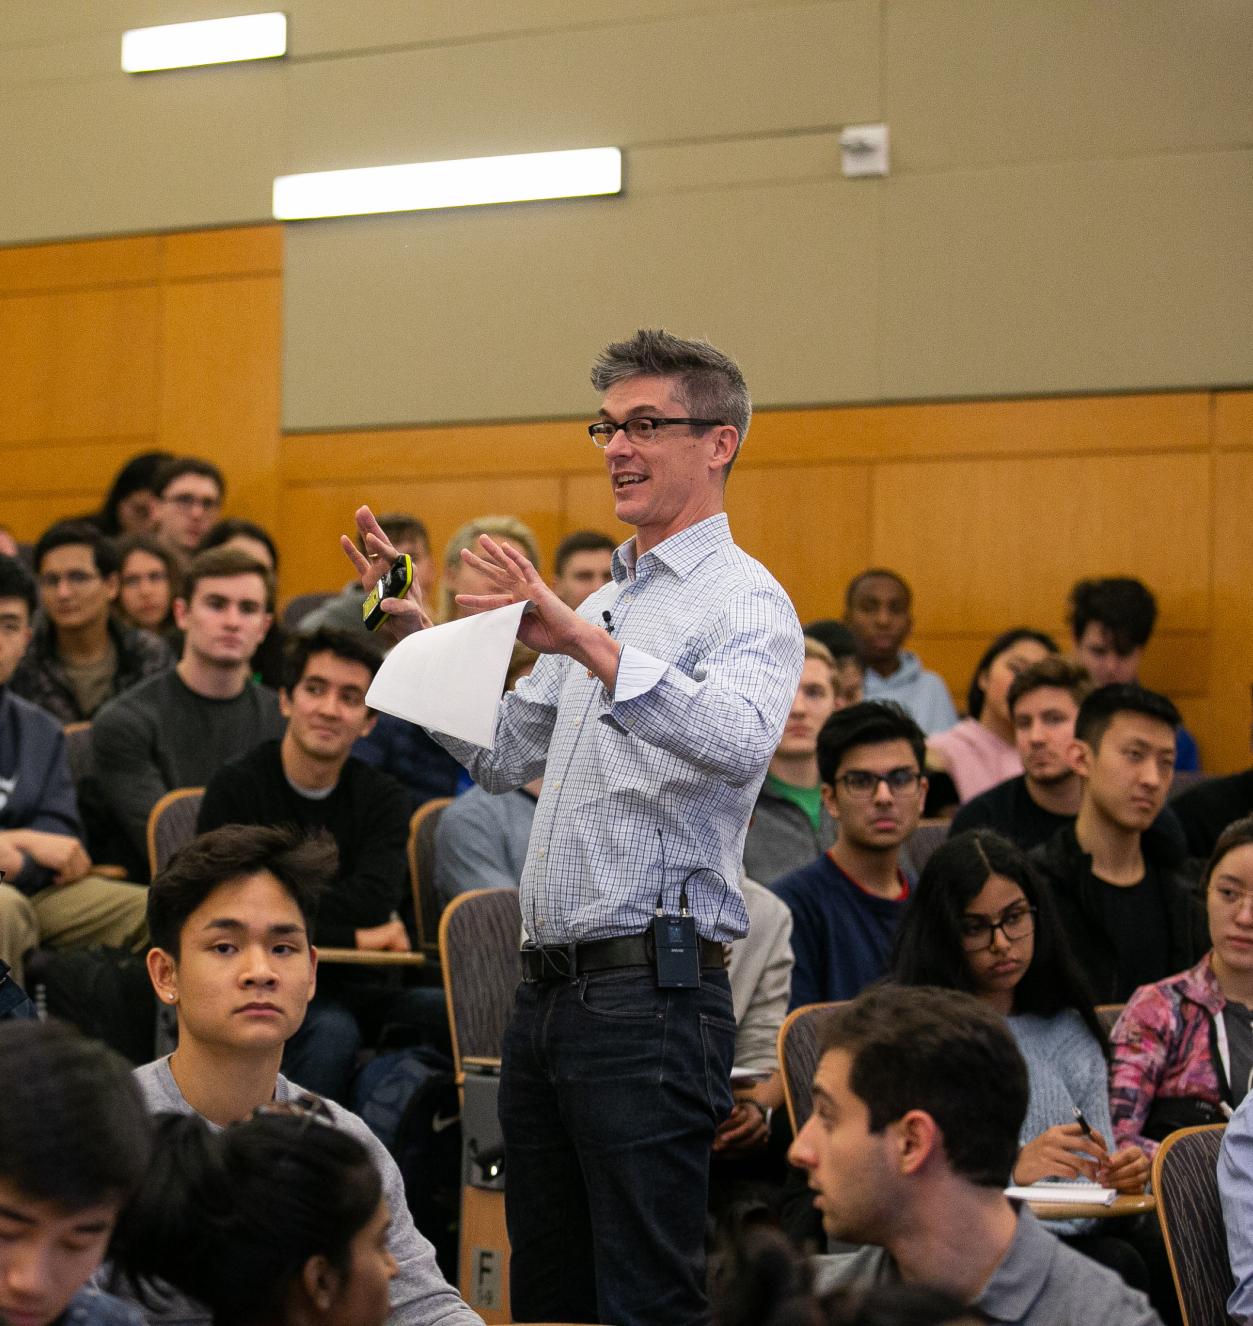 Professor speaking while standing in a crowd of seated students